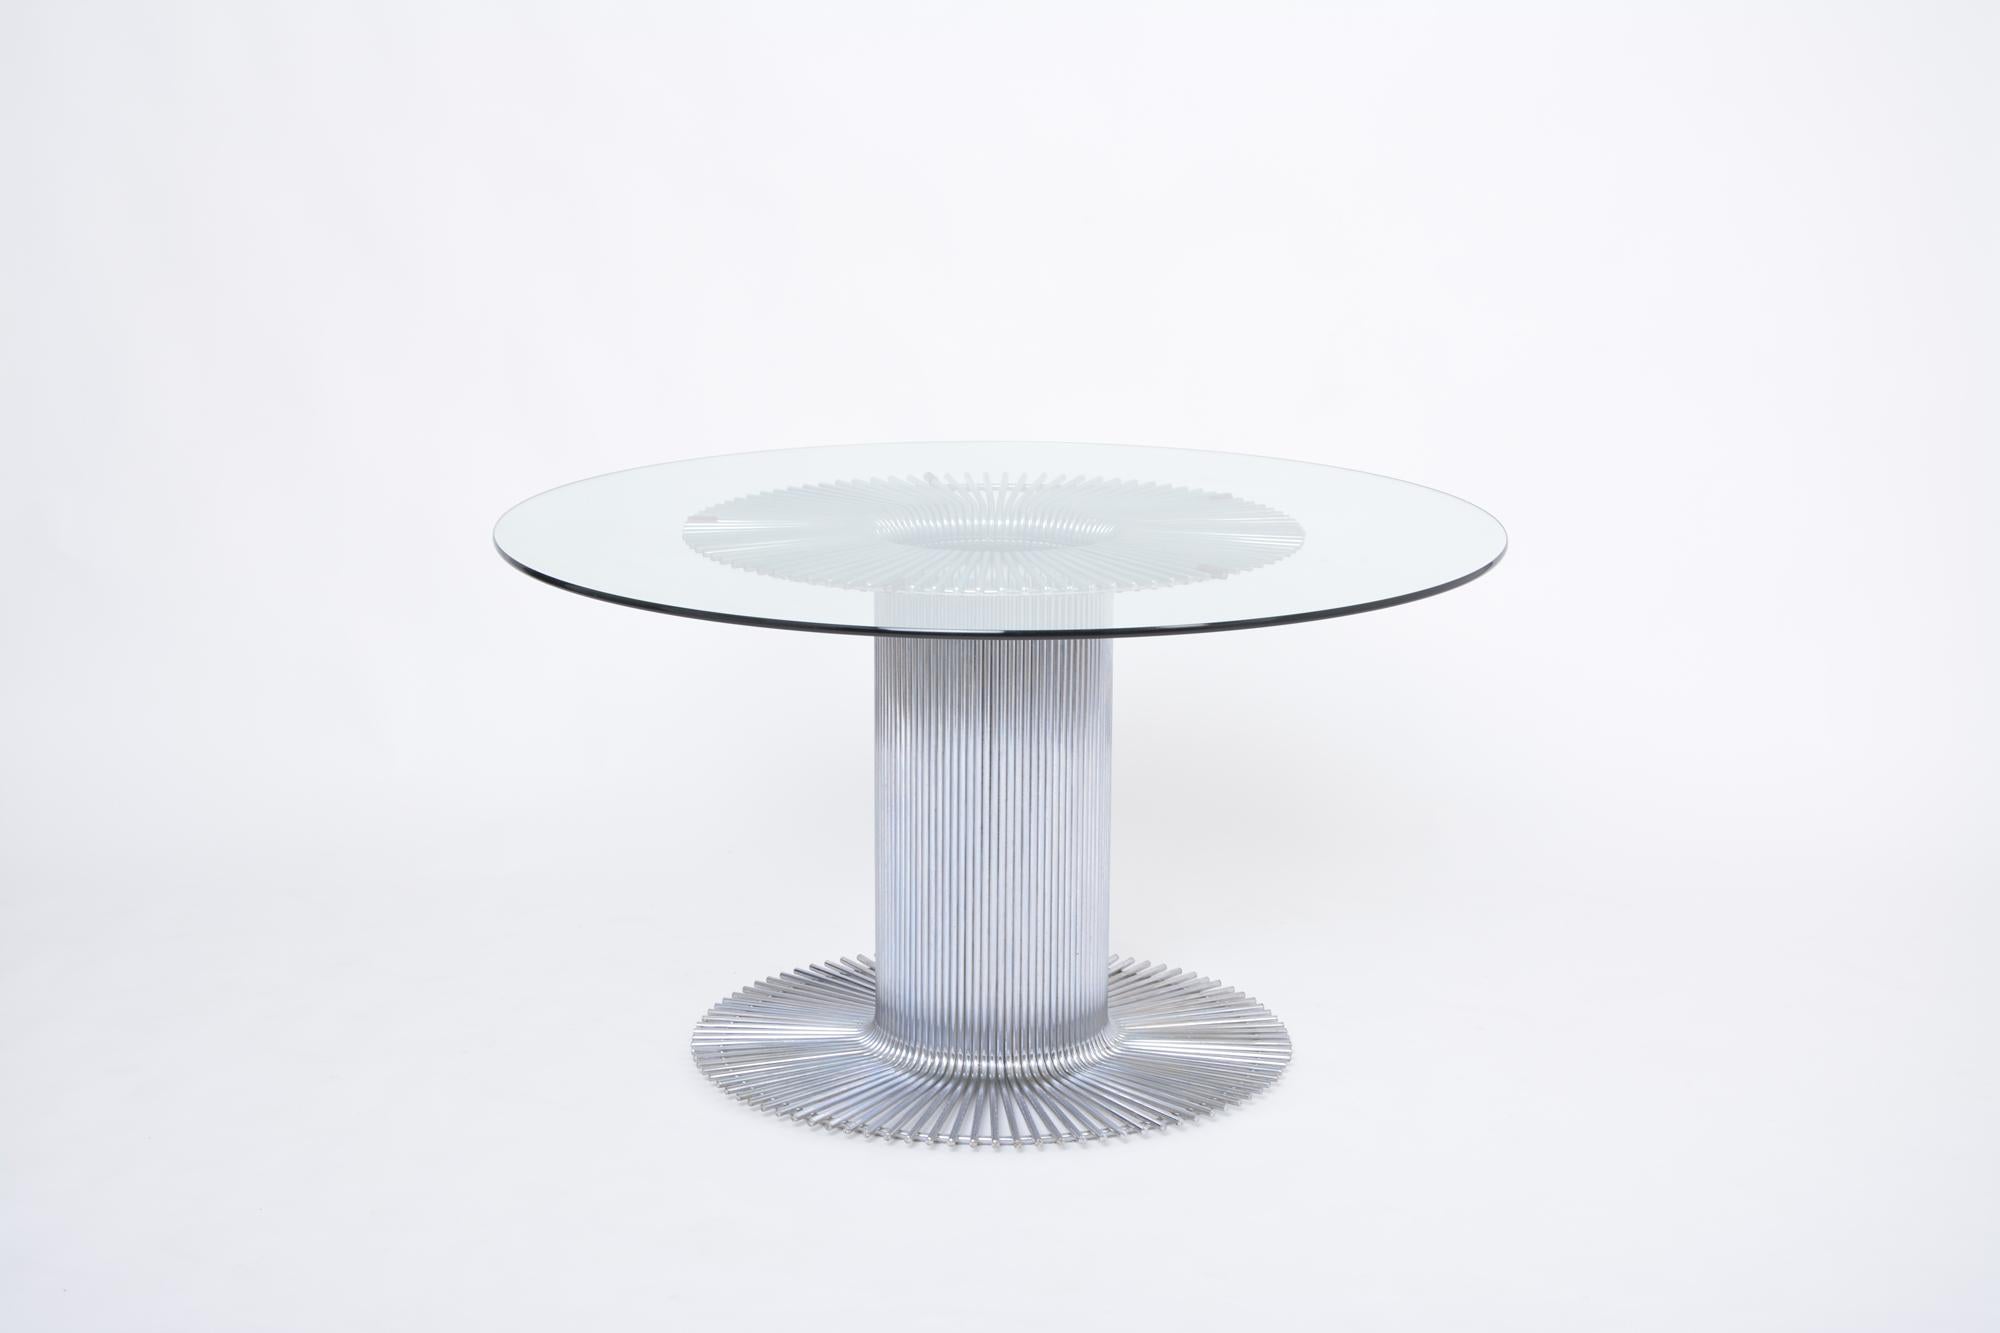 Italian chromed metal and glass dining table in the style of Gastone Rinaldi
Large dining table produced in Italy in the 1970s. The top is made of a circular glass top which measures 1.2 cm in thickness. The glass top has some superficial